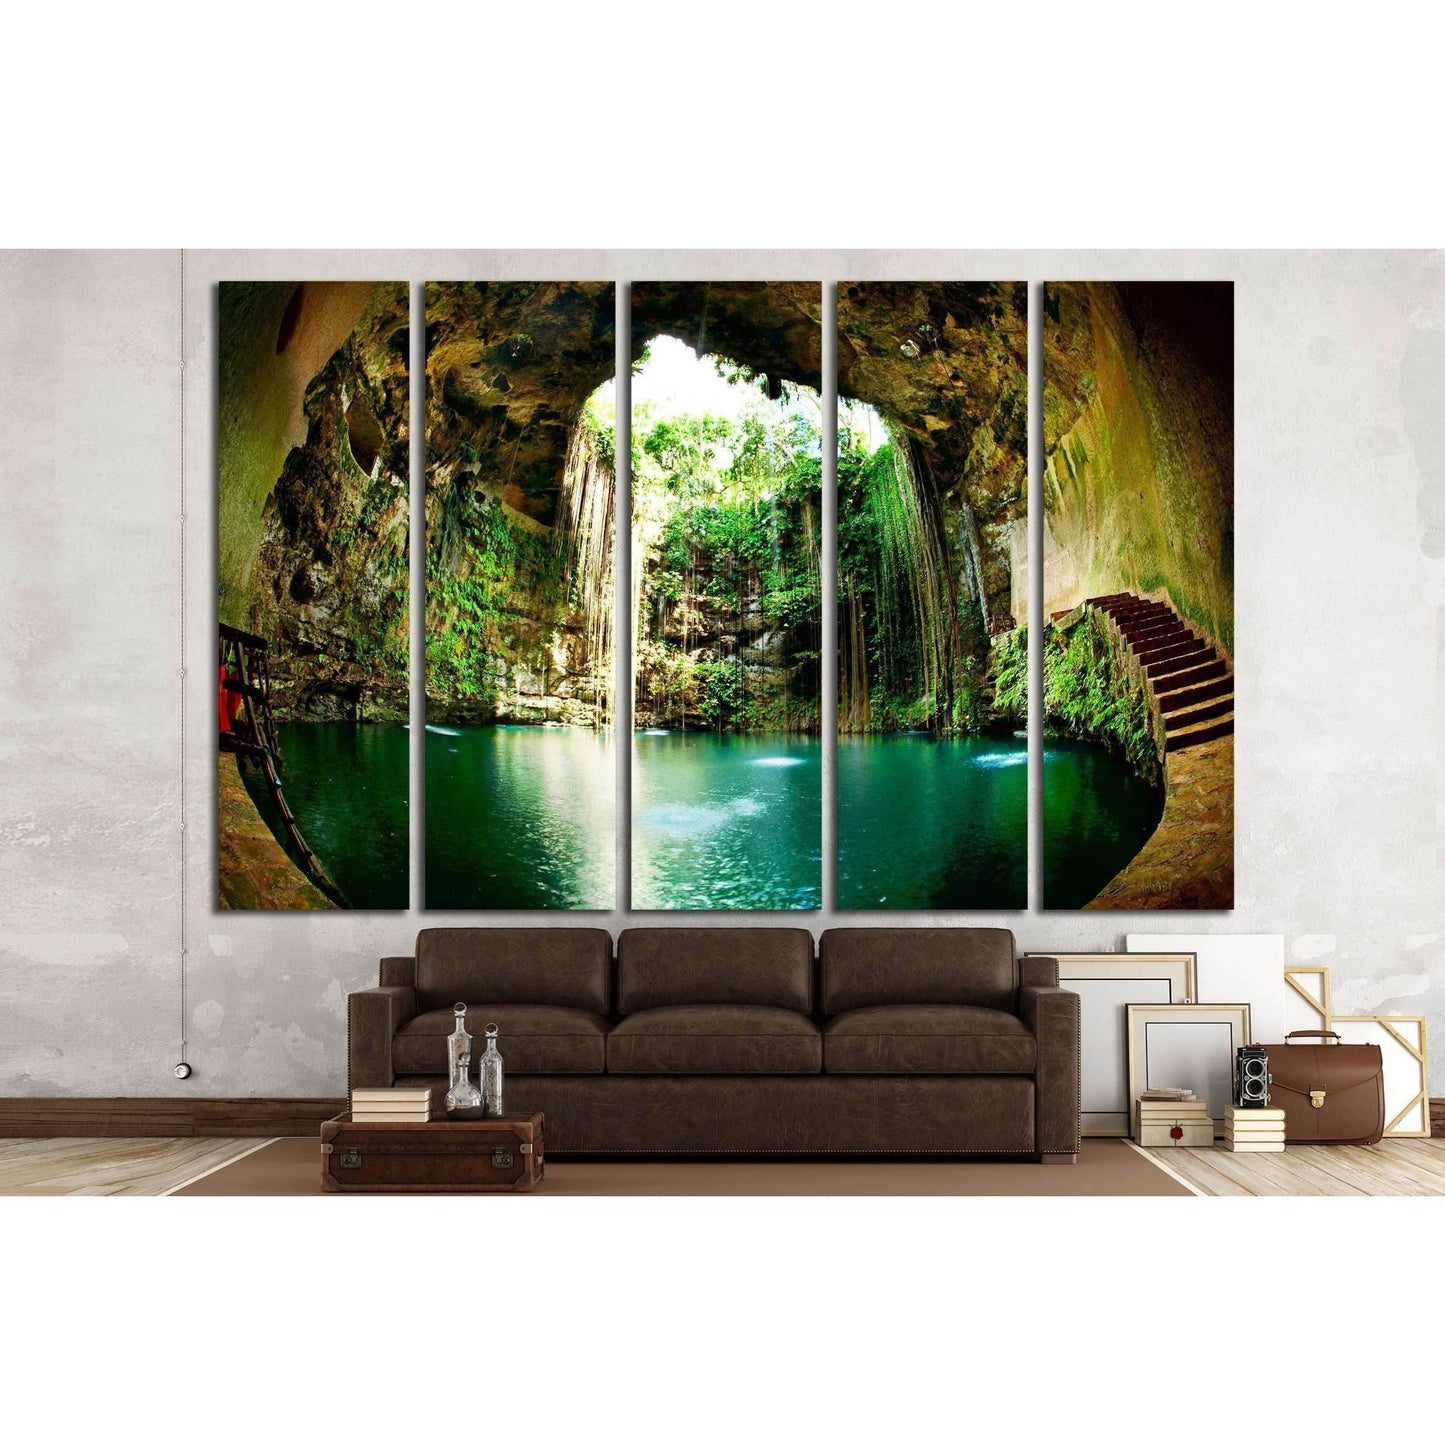 Ik-Kil Cenote, Chichen Itza, Mexico №2511 Ready to Hang Canvas PrintThis canvas print captures a serene natural cave pool, with sunlight filtering through lush greenery and a waterfall cascading into the tranquil water. The vivid green tones contrast with